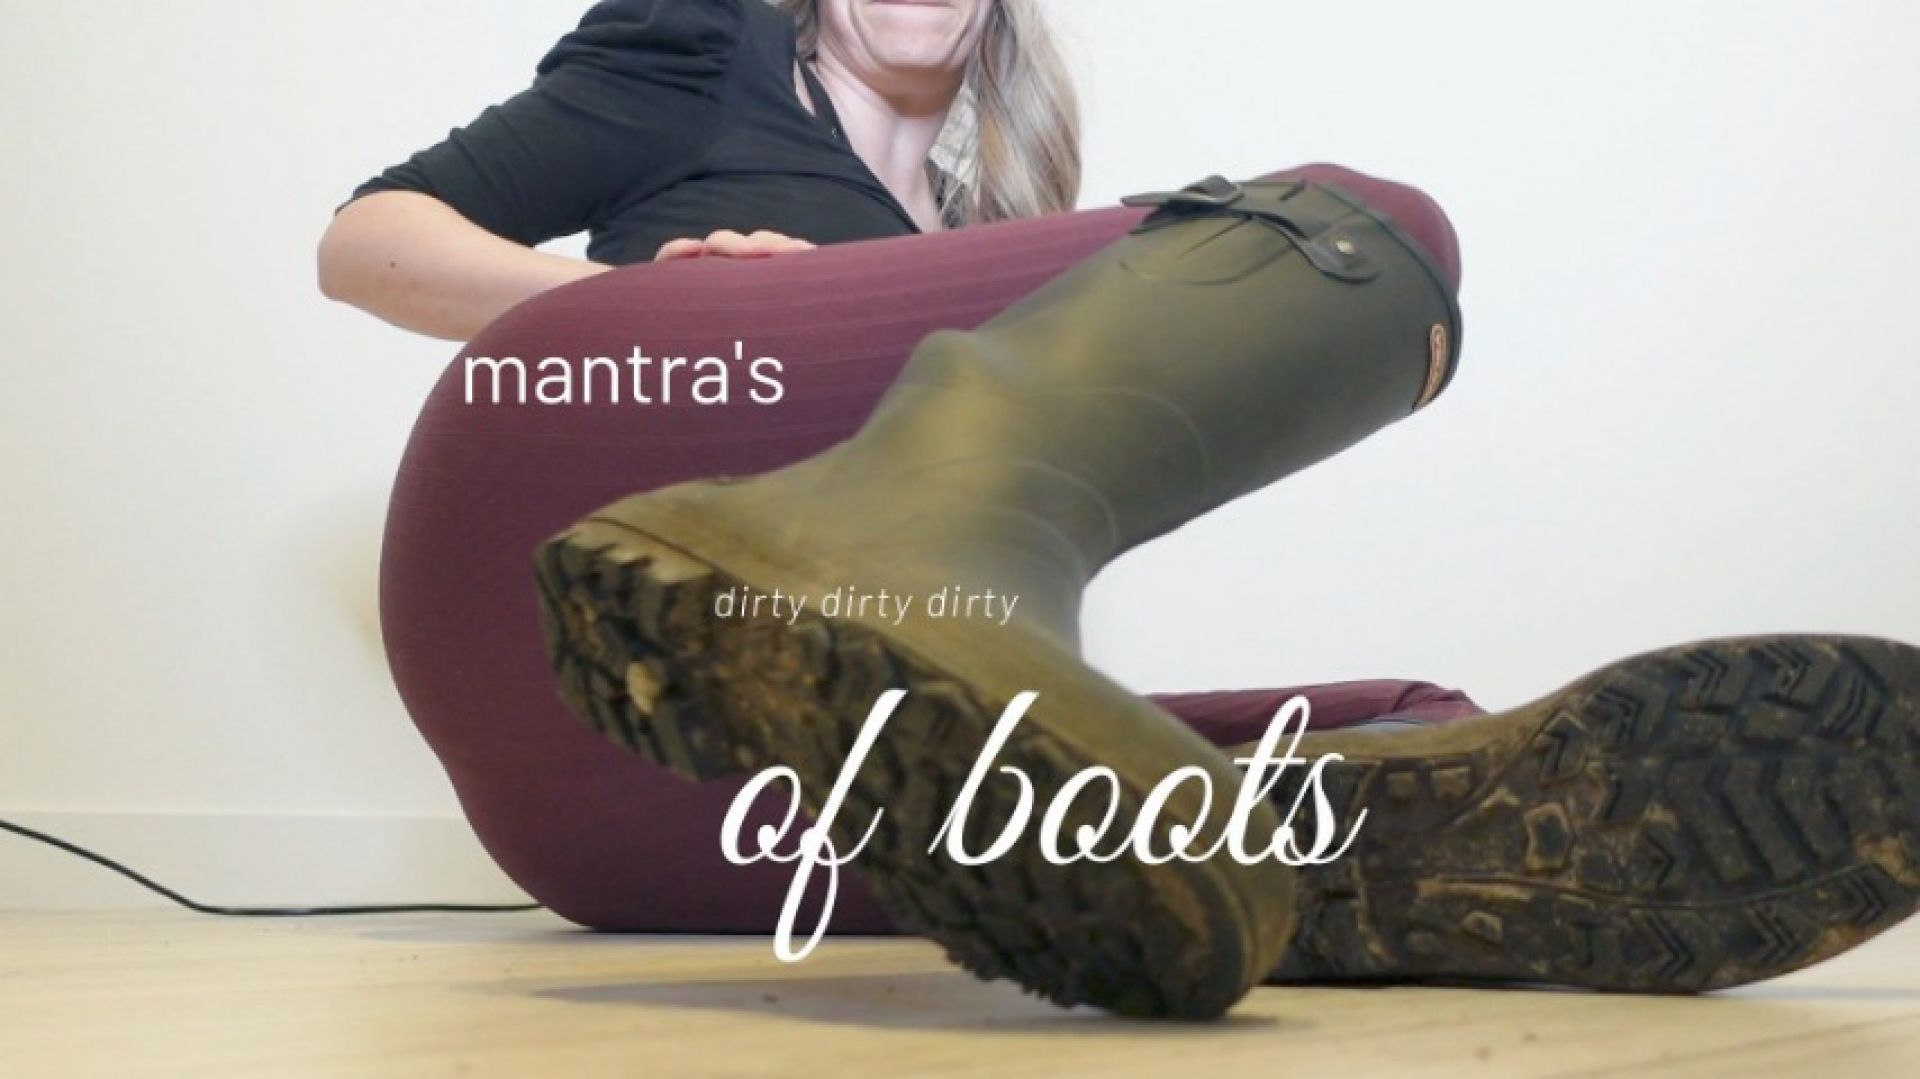 Mantra's for rose her boots